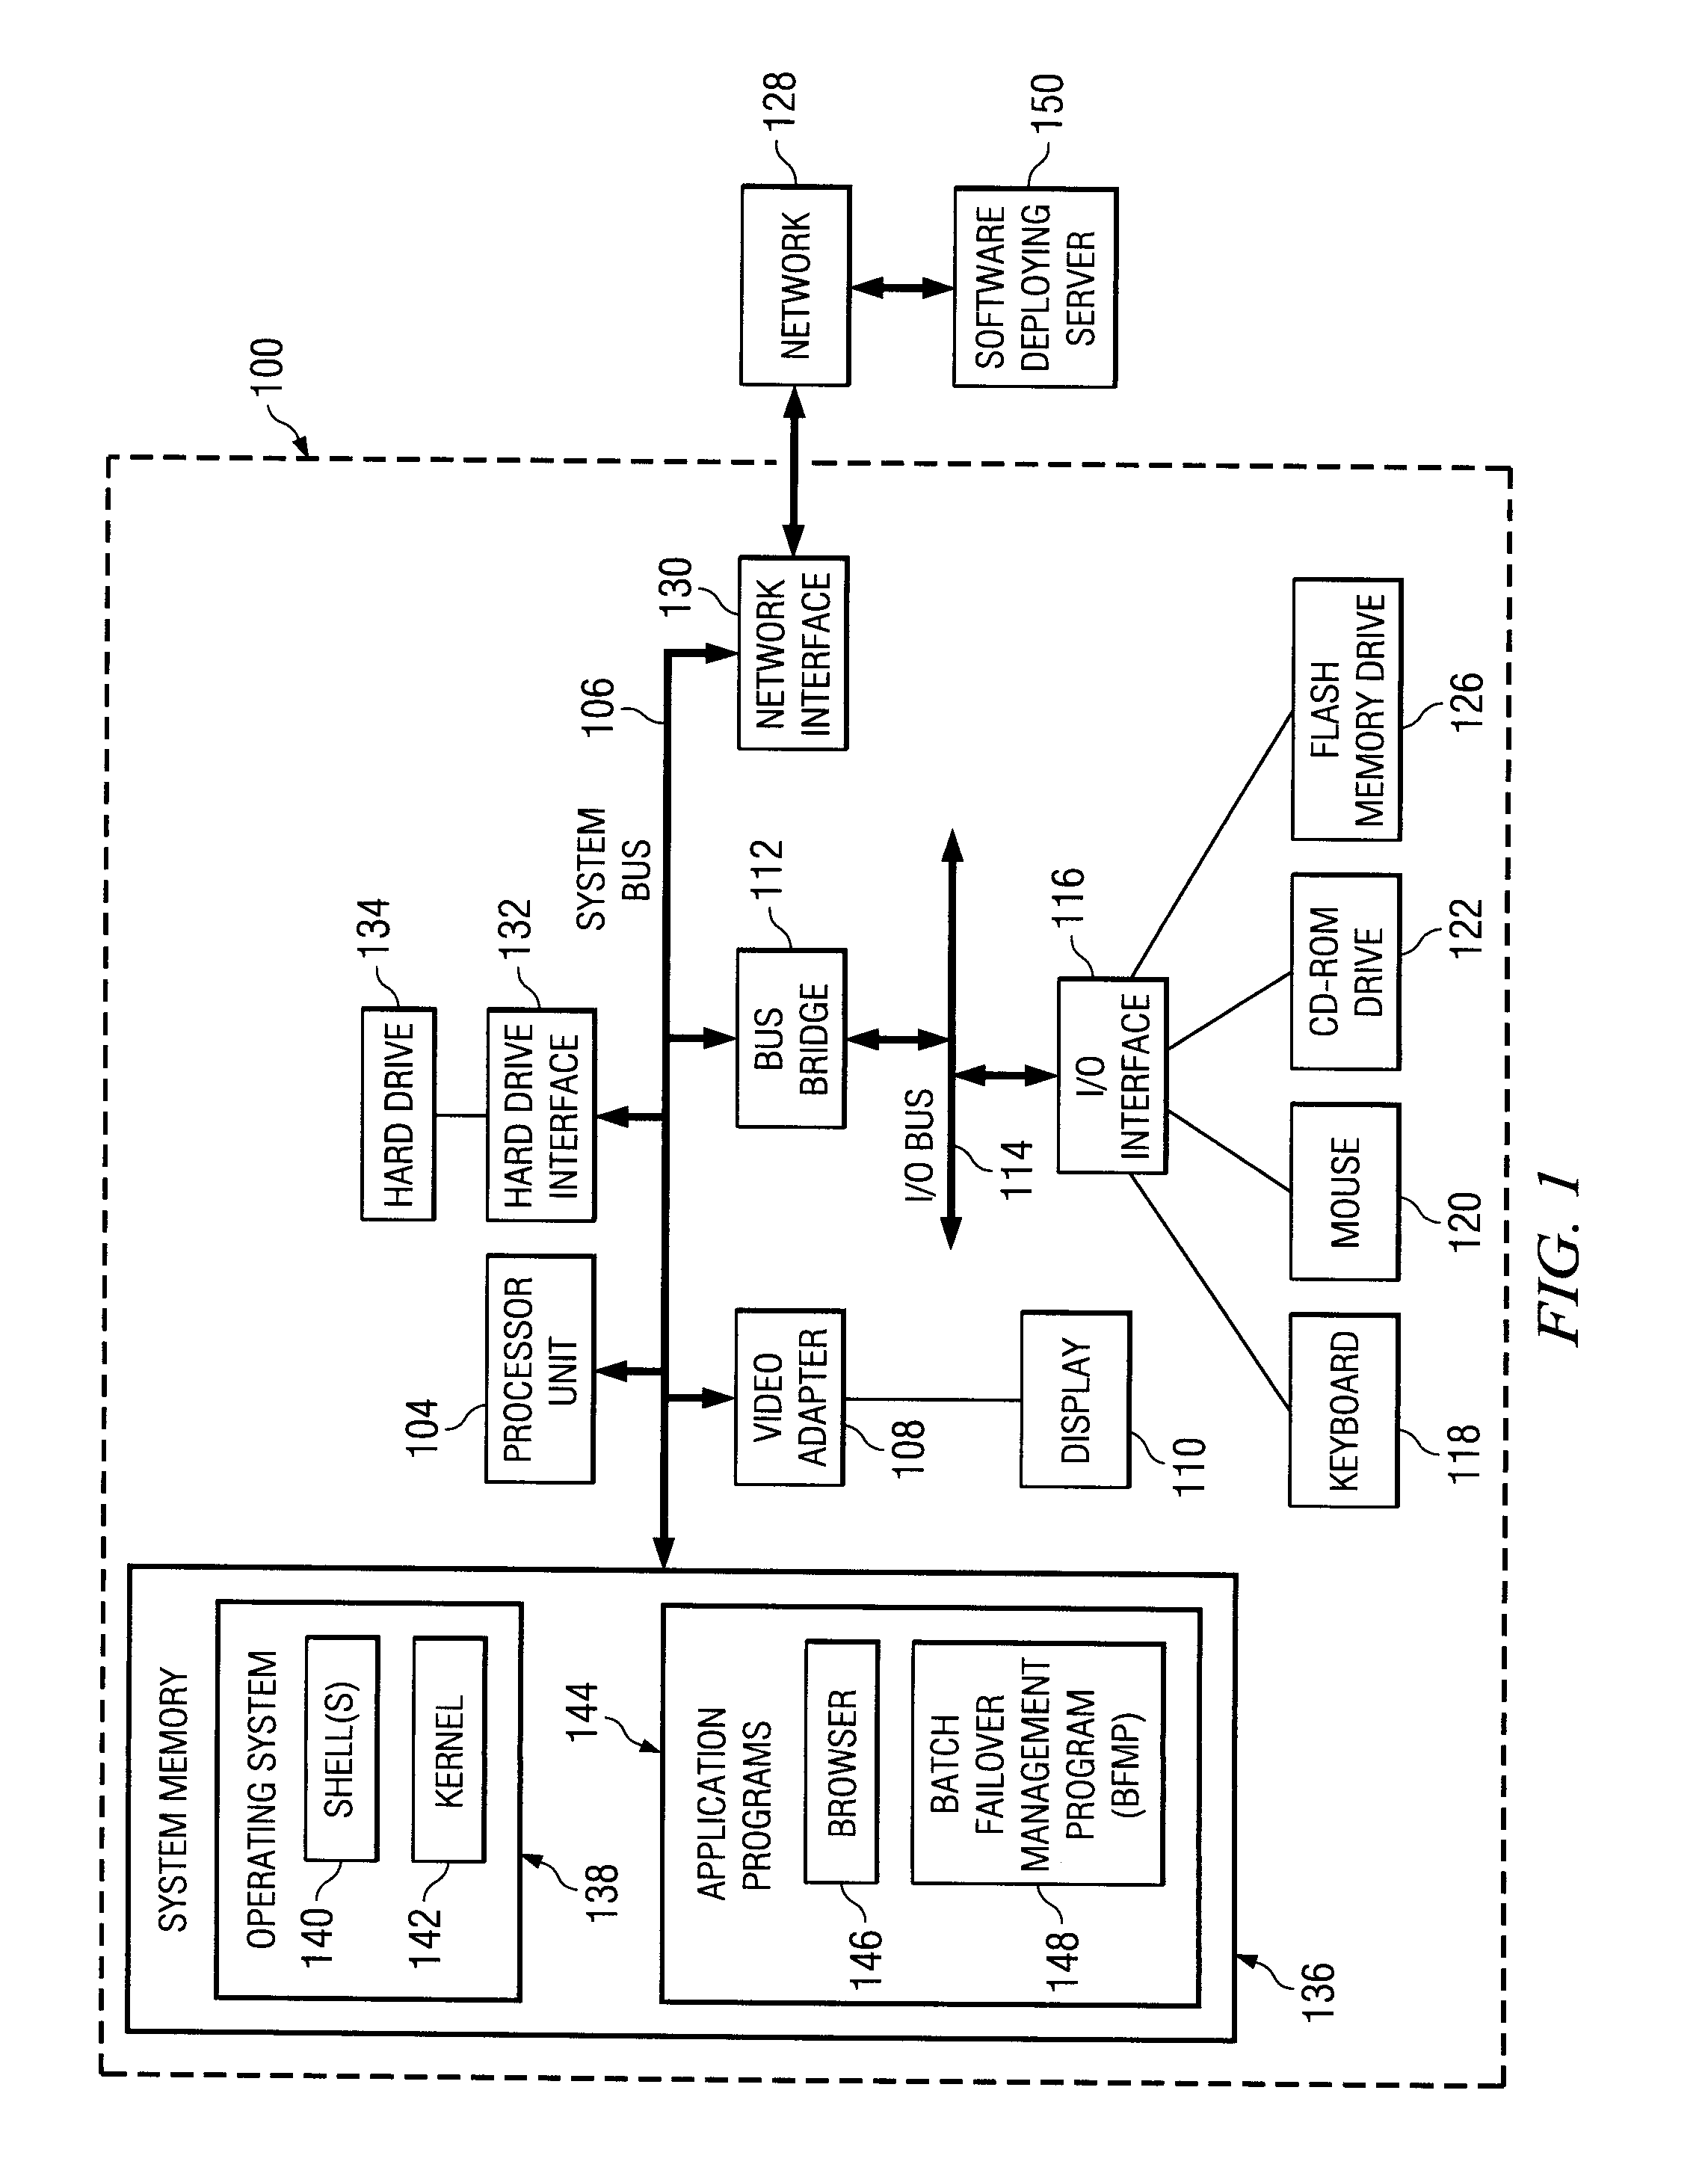 Mechanism to Enable and Ensure Failover Integrity and High Availability of Batch Processing